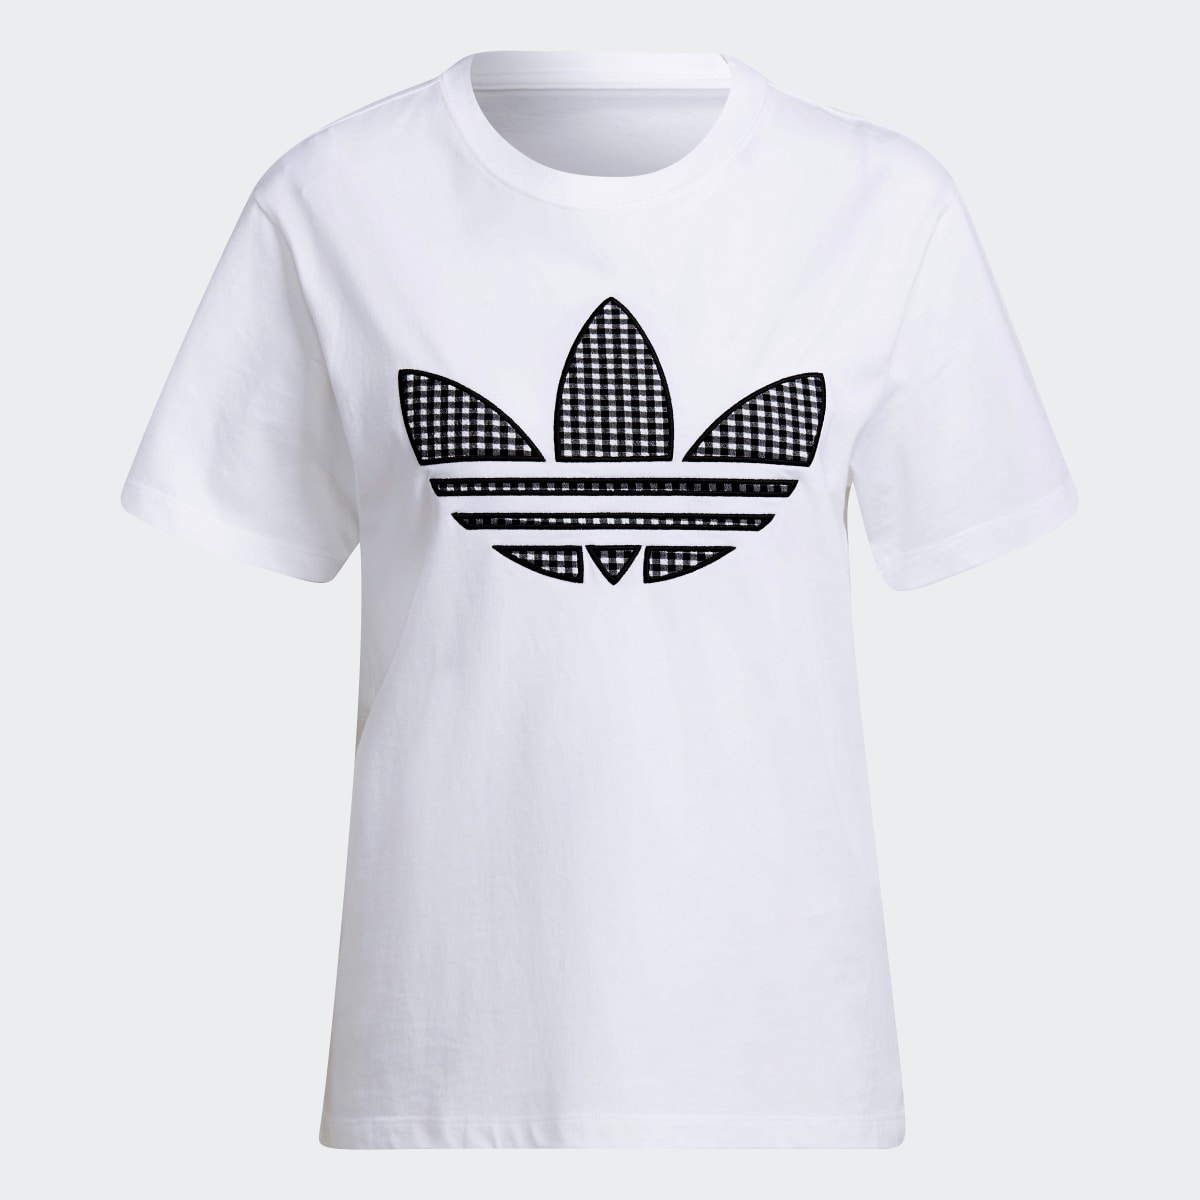 Adidas Tee with Trefoil Application. 6